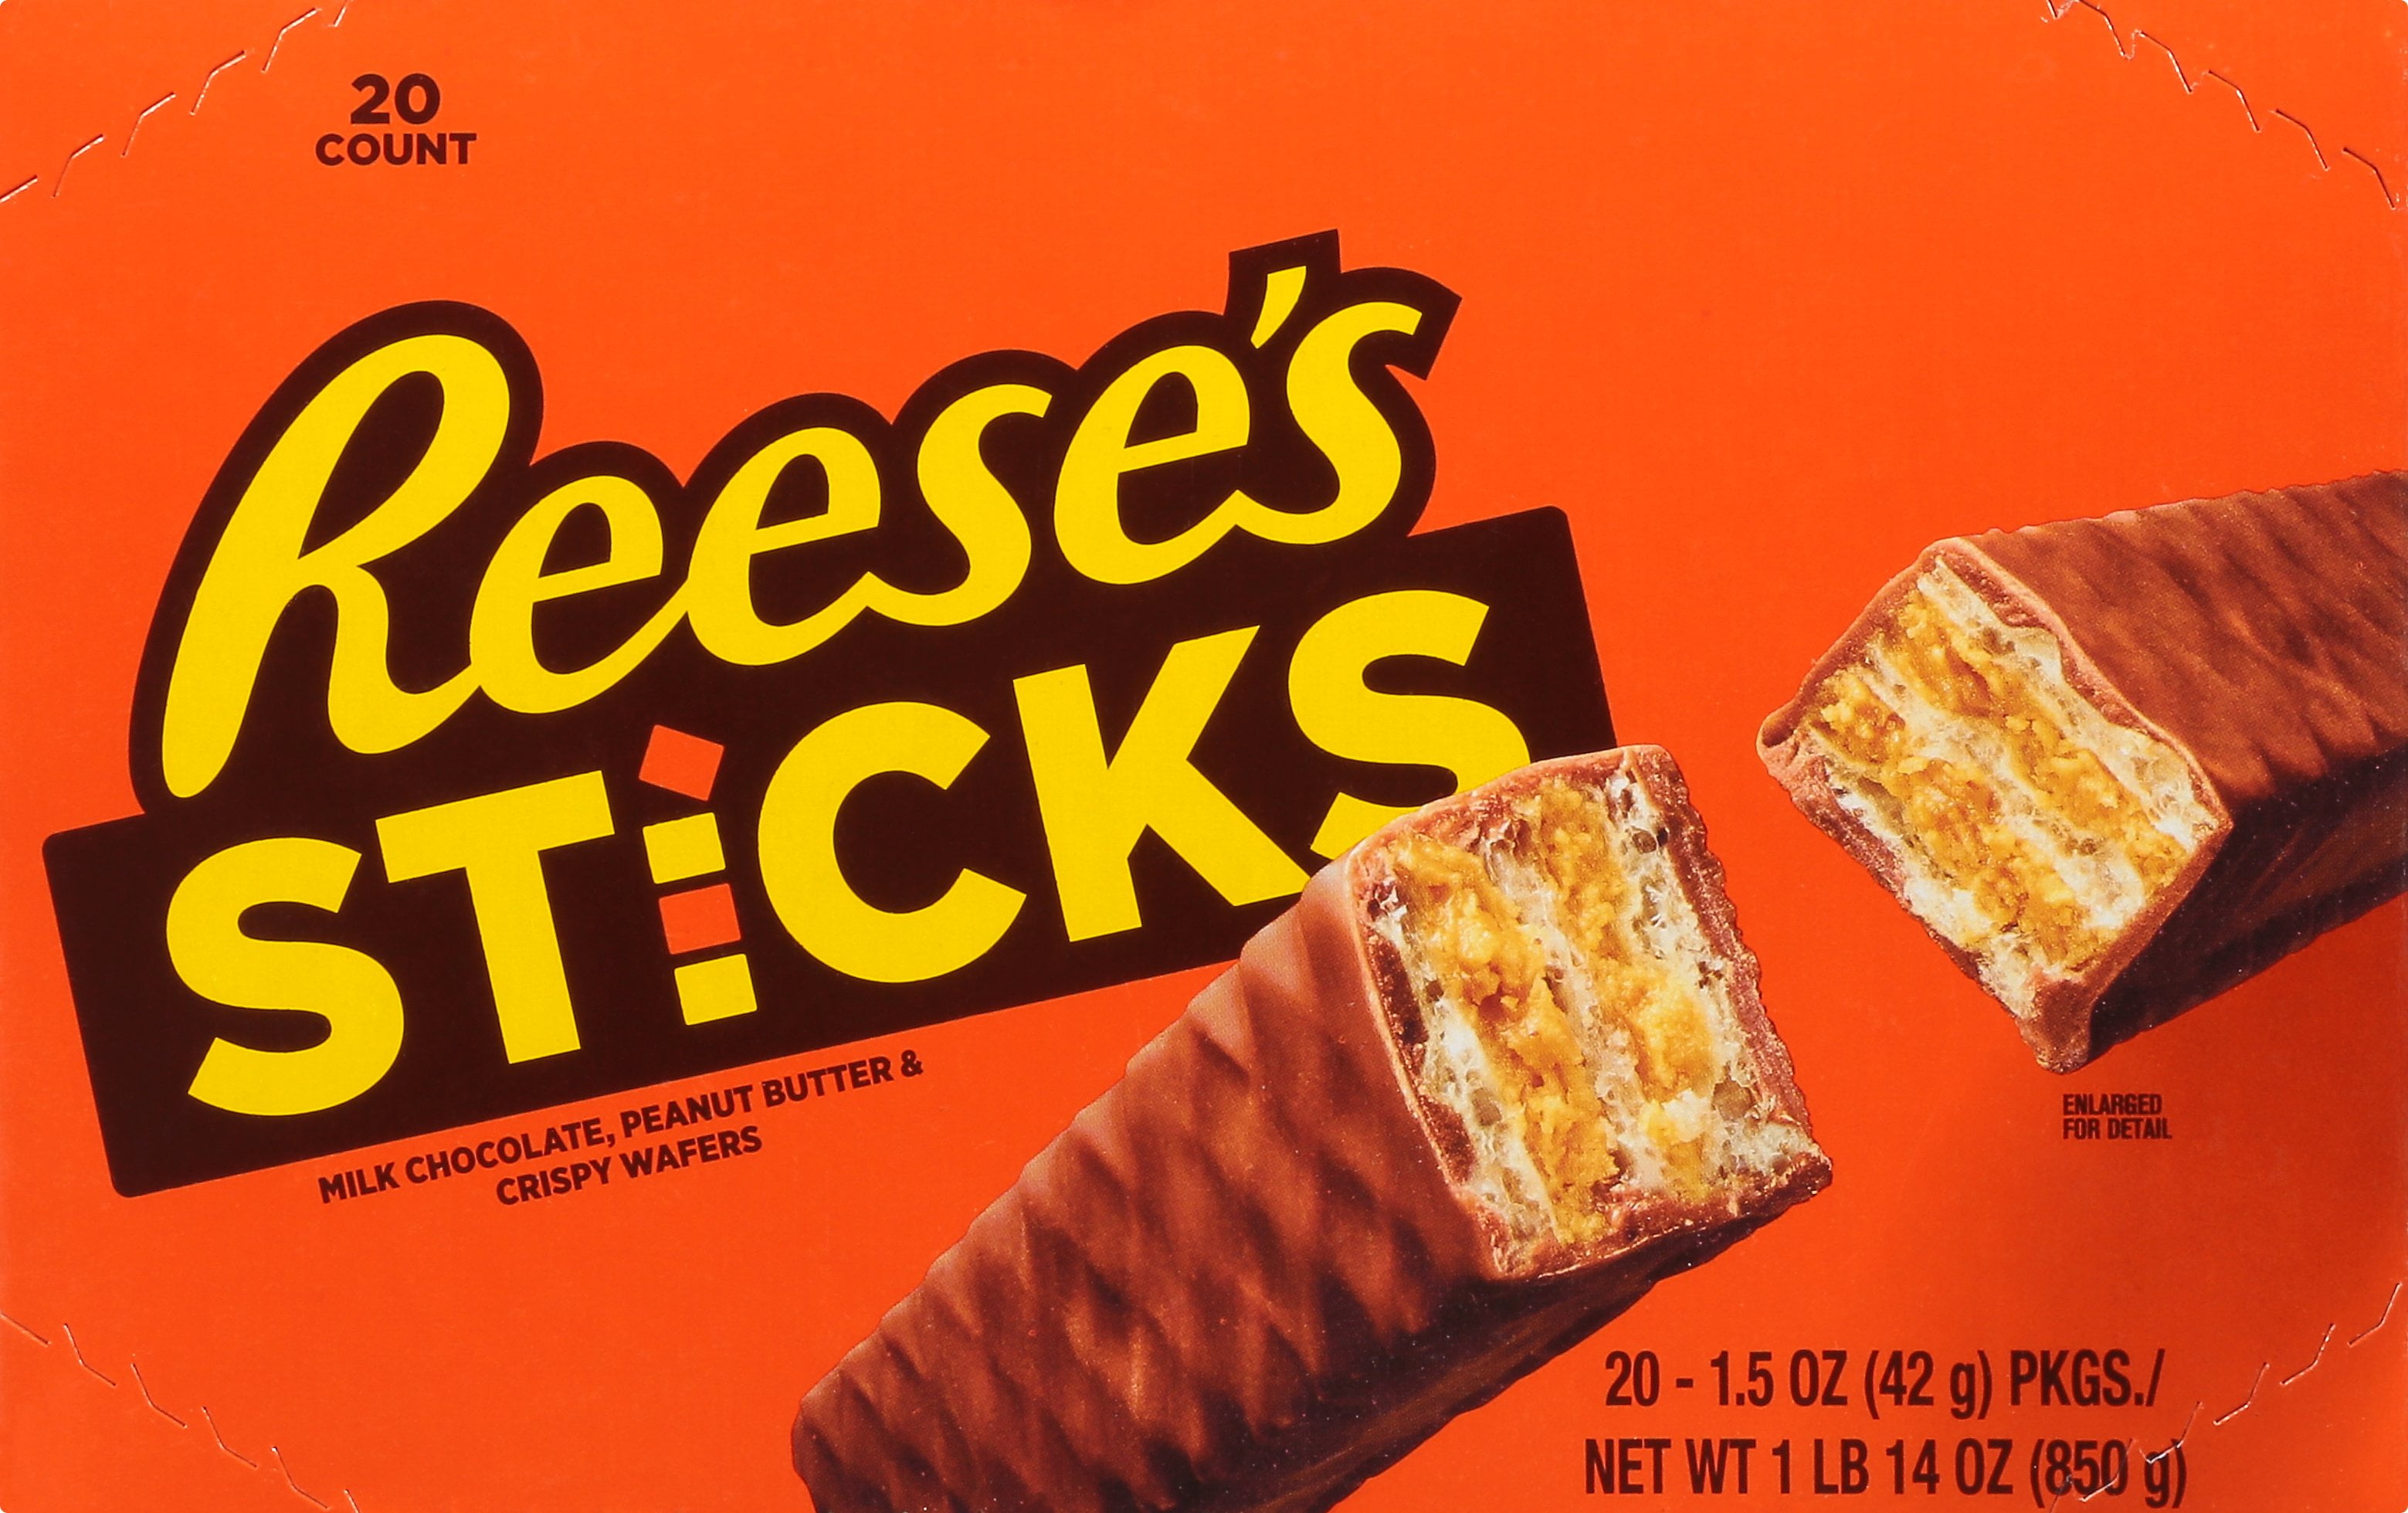 REESE'S Peanut Butter Candy Sticks, 1.5 Ounce- Pack of 20 Bundle